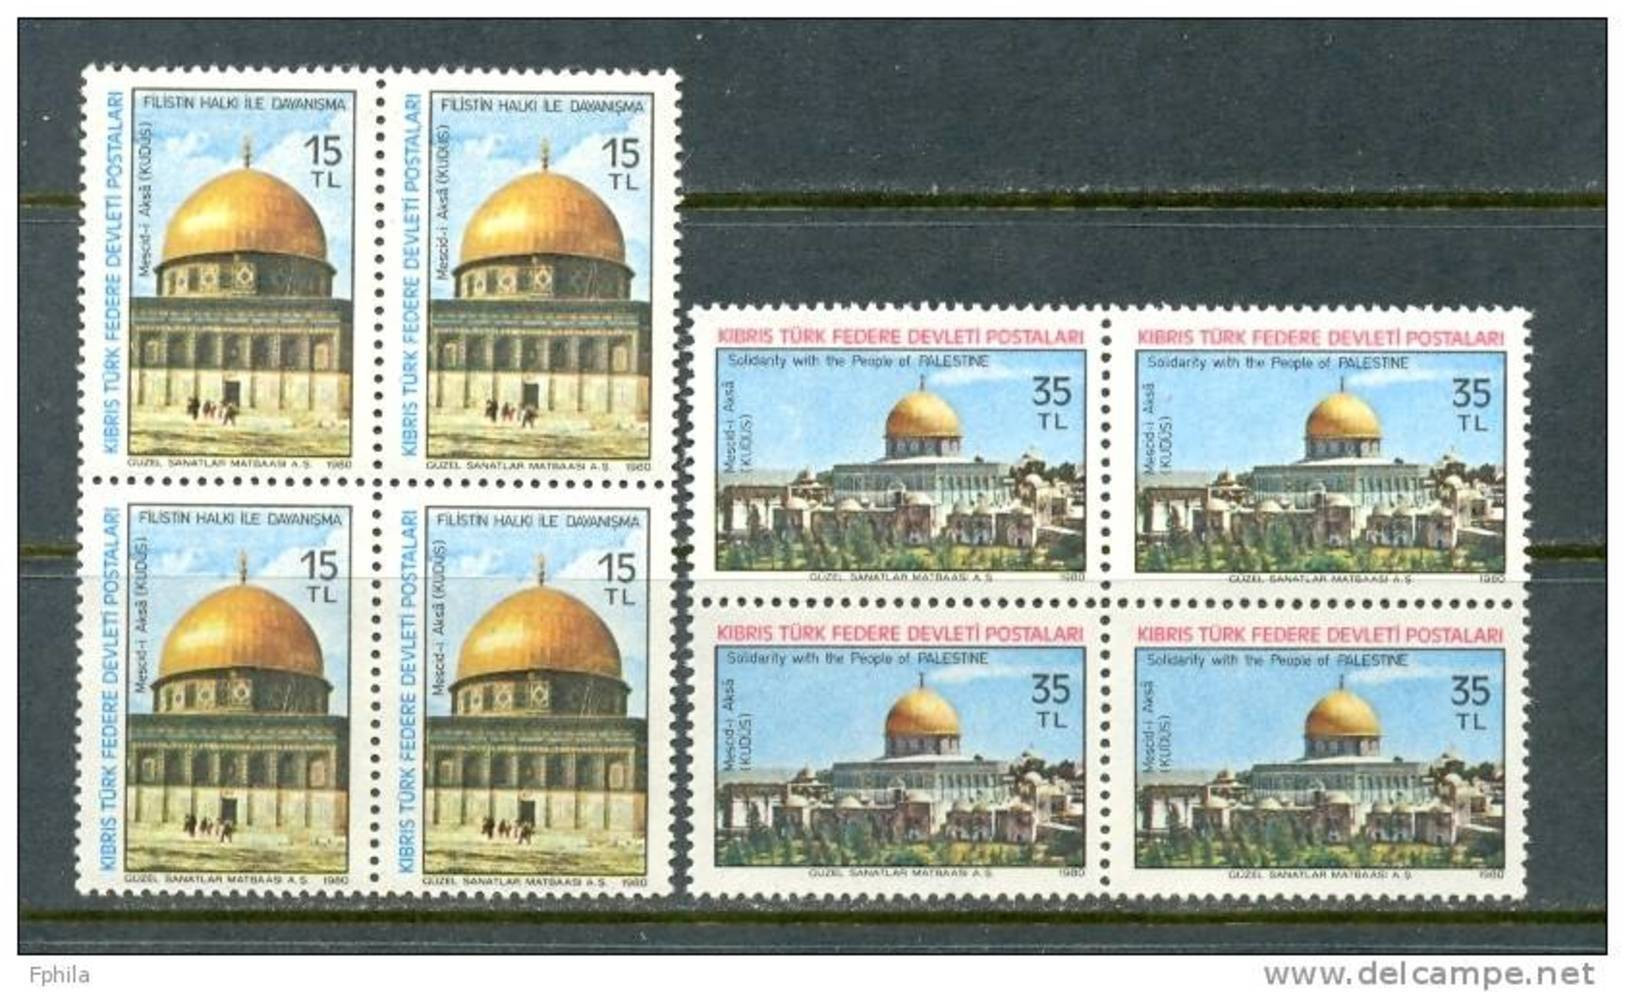 1980 NORTH CYPRUS SOLIDARITY WITH THE PEOPLE OF PALESTINE BLOCK OF 4 MNH ** - Neufs